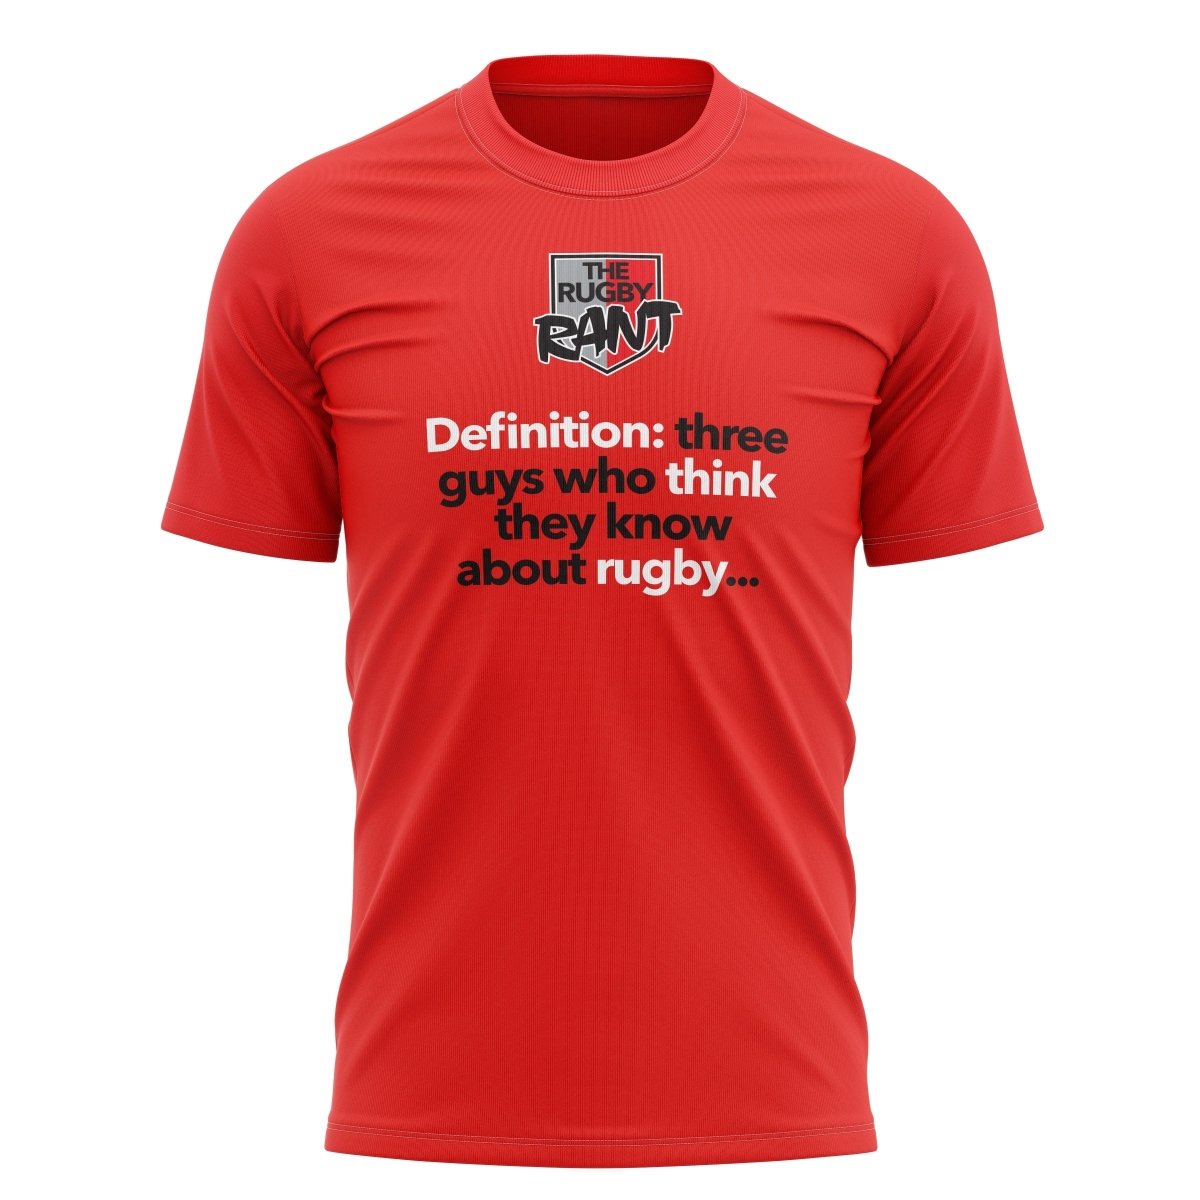 The Rugby Rant "Definition" Tee - Unisex - www.therugbyshop.com www.therugbyshop.com SANMAR TEES The Rugby Rant "Definition" Tee - Unisex